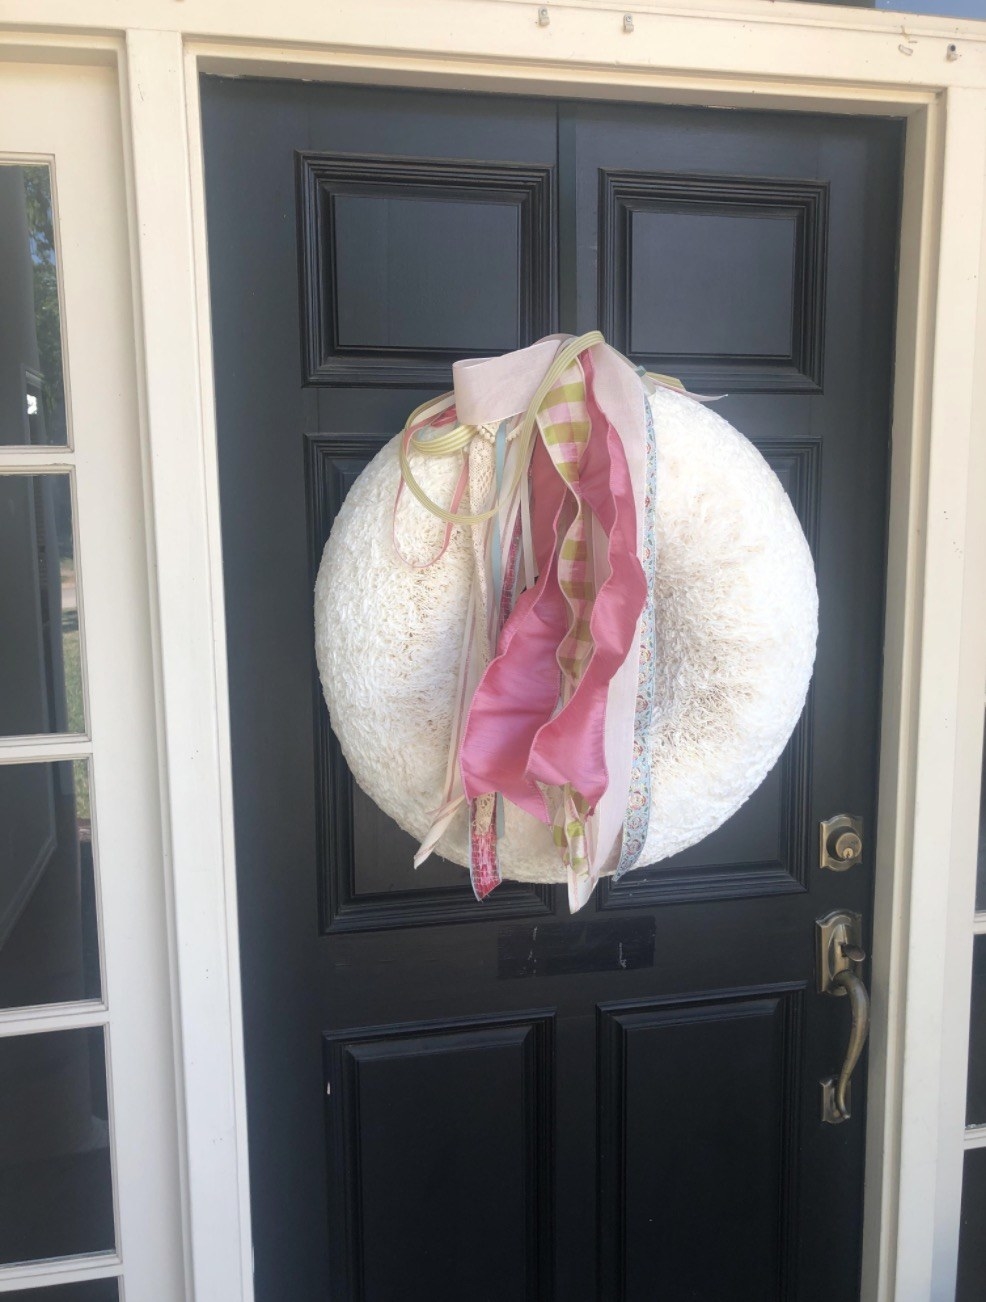 A large, pillowy-looking round white wreath with pink and white tassels and ribbons hanging in the middle hangs on a door